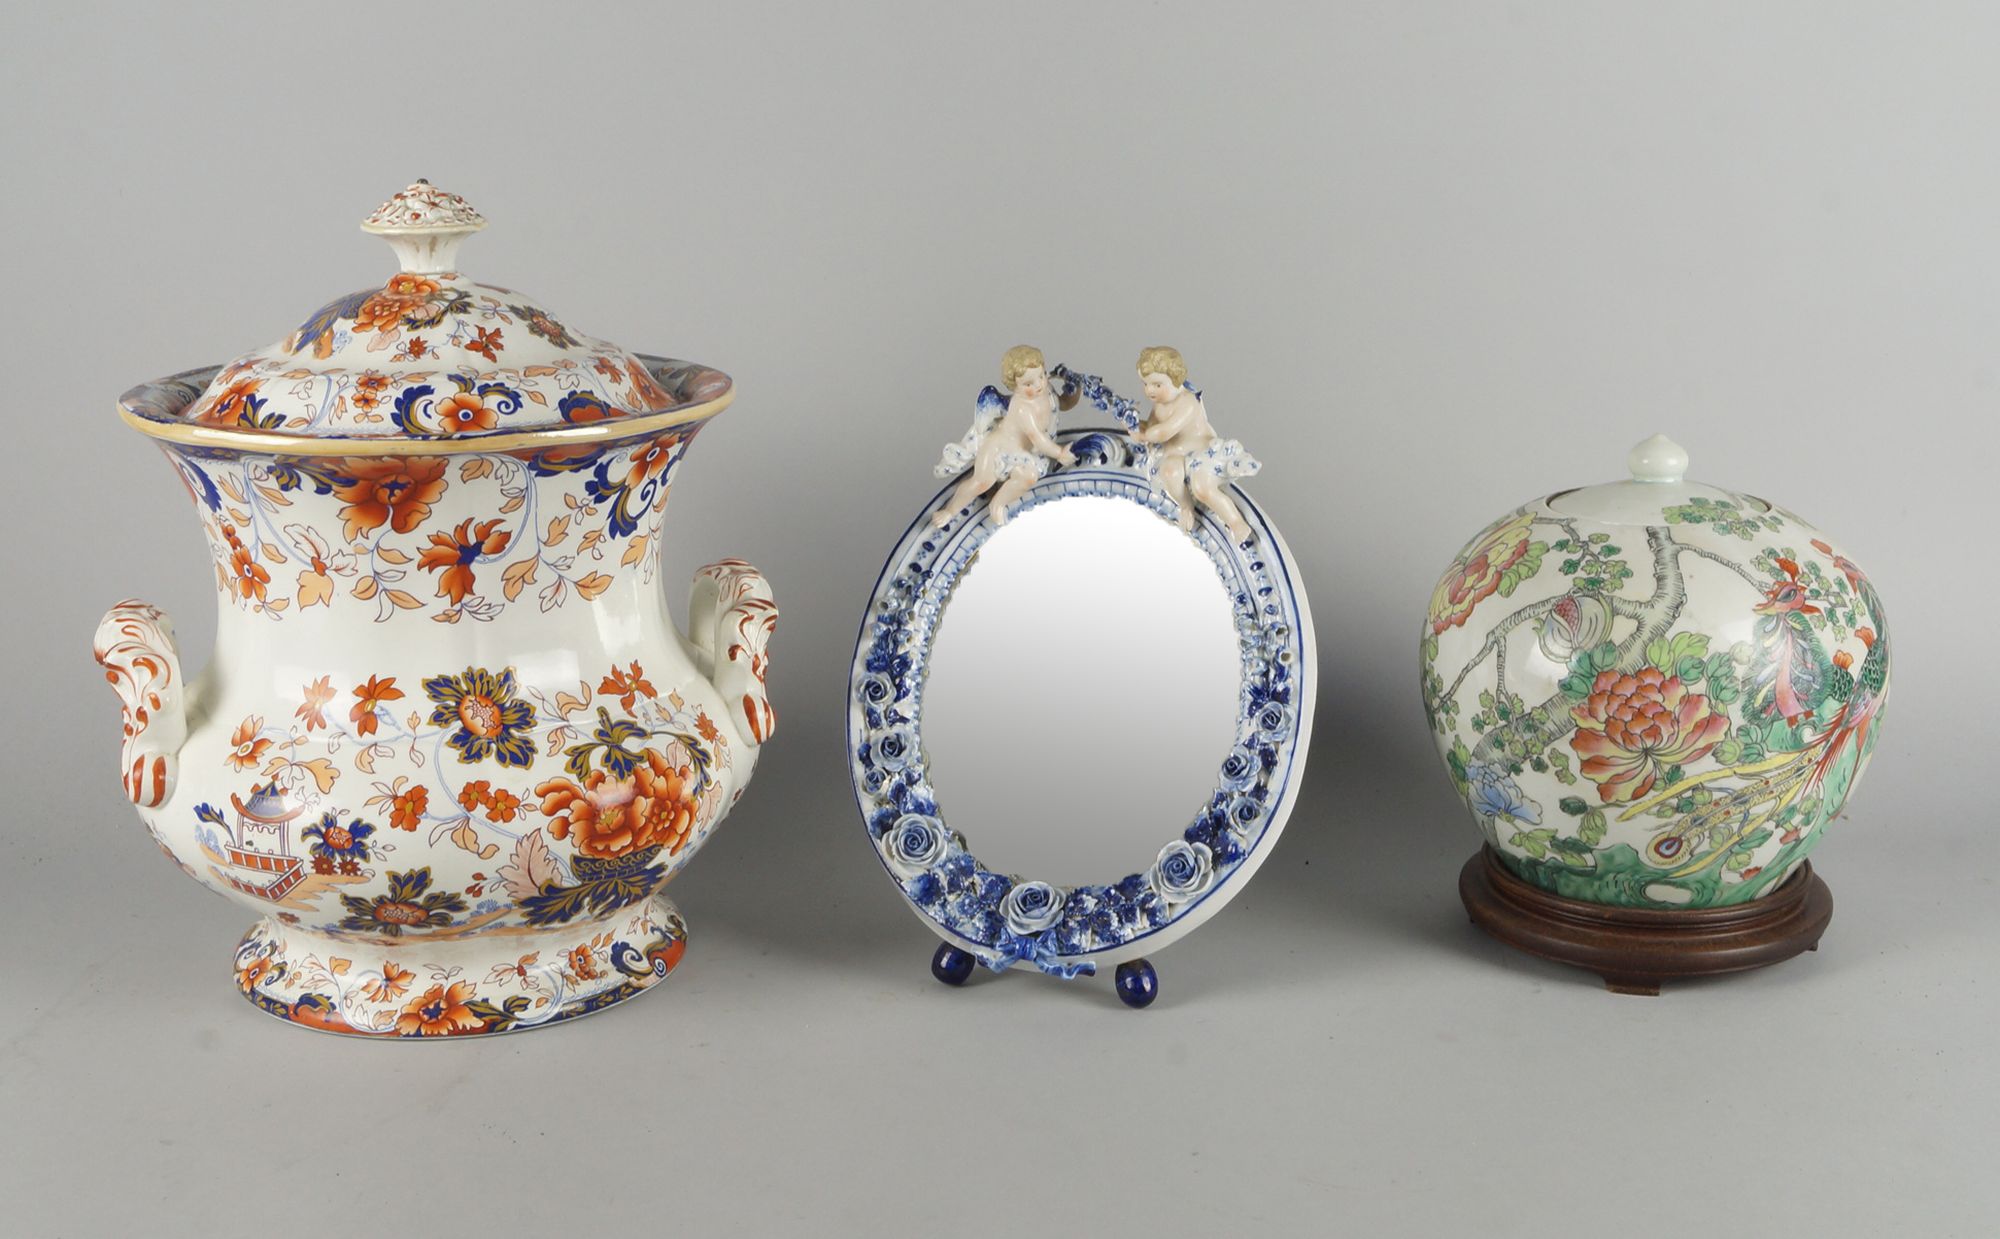 A German Dresden type porcelain mirror, late 19th century, with a cresting in the form of a pair